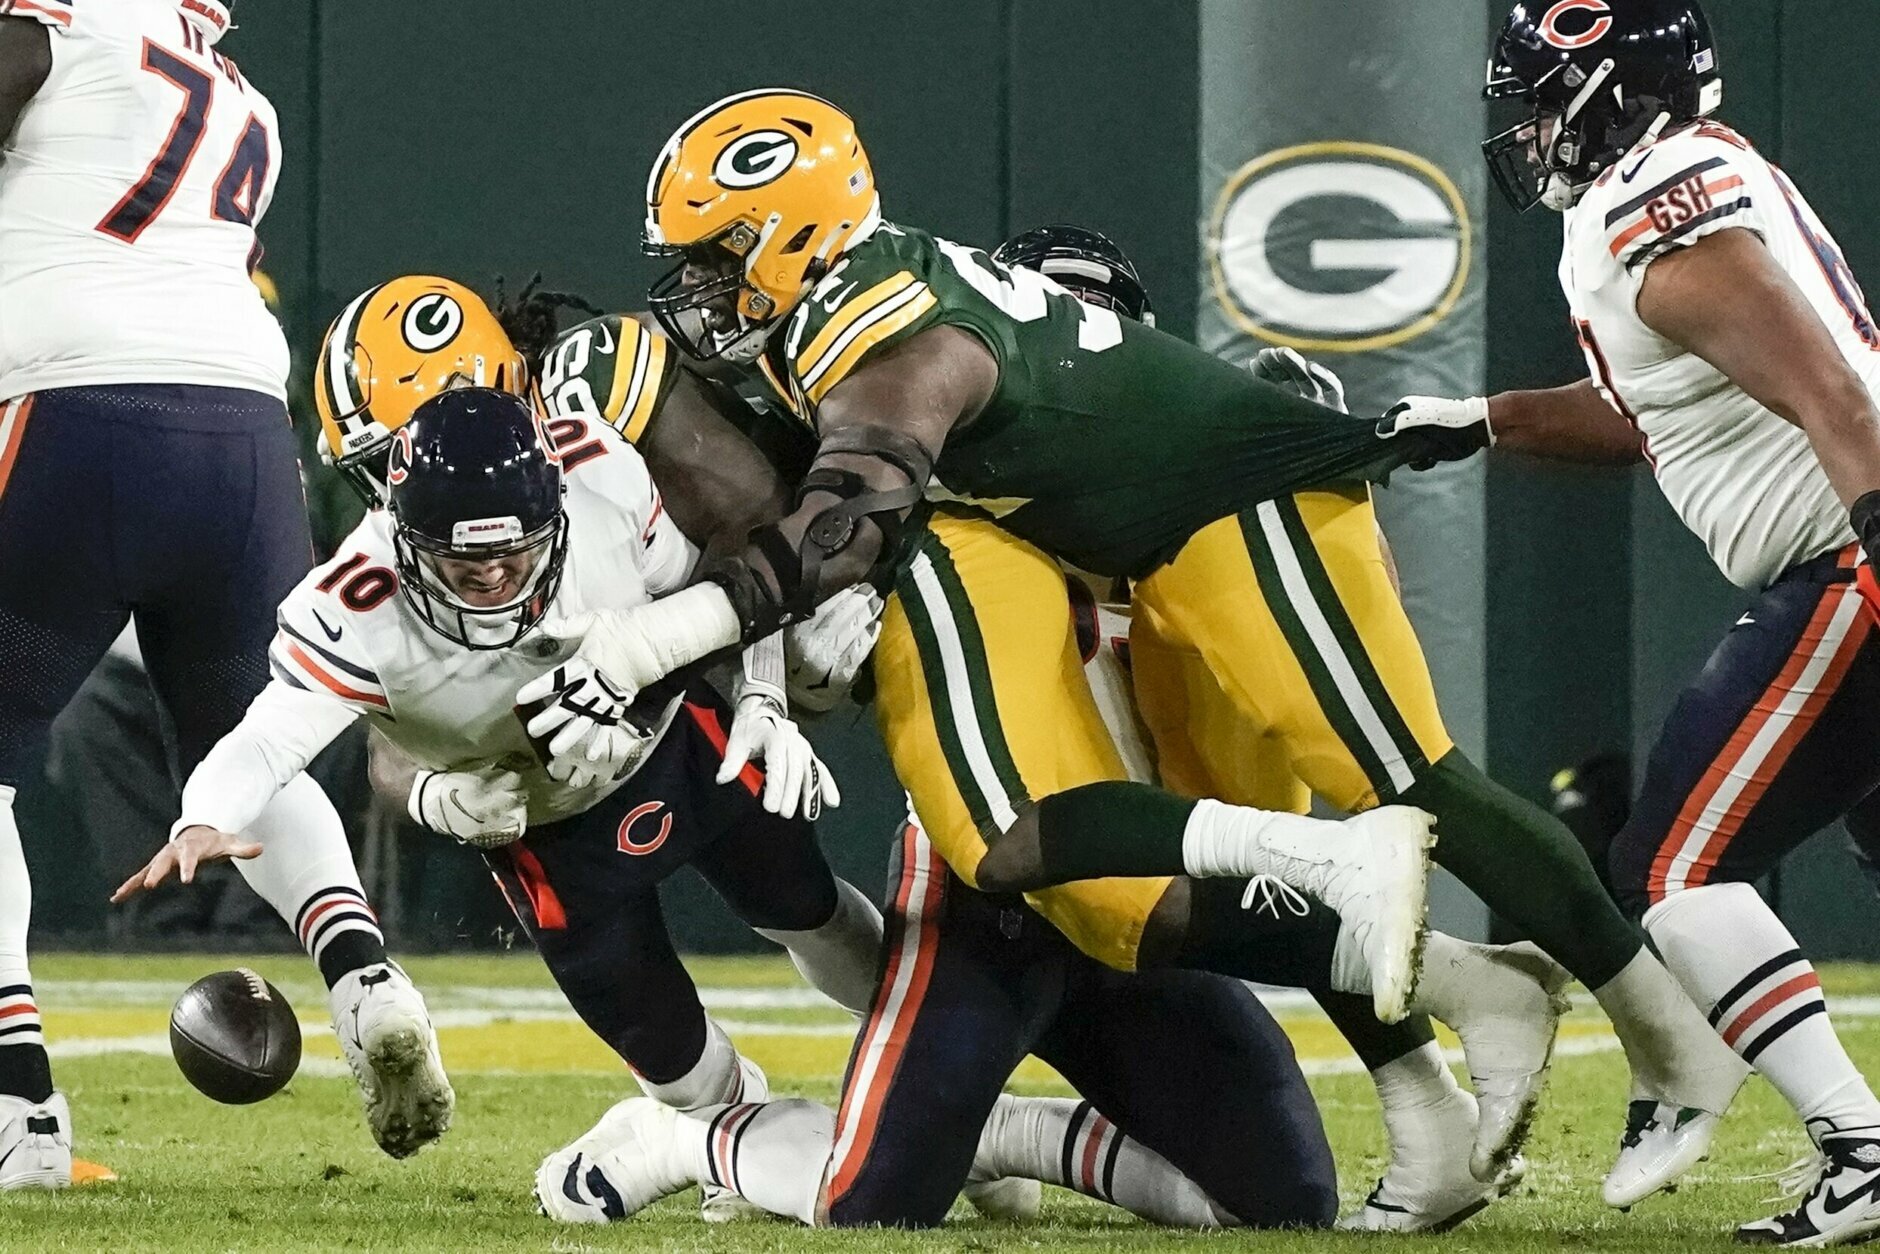 <p><b>Bears 25</b><br />
<b>Packers 41</b></p>
<p>Here&#8217;s how bad the Chicago&#8217;s quarterback situation is right now: Mitchell Trubisky turned the ball over three times yet he&#8217;s still their most productive QB because he&#8217;s also capable of throwing three touchdowns in the same game. Chicago &#8212; only the second team in NFL history to lose five straight after a 5-1 start &#8212; had no chance of taking advantage of <a href="https://profootballtalk.nbcsports.com/2020/11/23/blown-leads-plague-packers-in-2020/" target="_blank" rel="noopener">Green Bay&#8217;s propensity to blow leads</a>. That&#8217;s why the Packers are going to coast into the NFC North title, and <a href="https://youtu.be/aYKIcnj1MJY" target="_blank" rel="noopener">the Bears are who we thought they were</a>.</p>
<p>Oh, did I mention Aaron Rodgers threw for four touchdowns and became the fourth-fastest player to 50,000 career passing yards? Just another notch on <a href="https://twitter.com/NFL/status/1185993258259714048?s=20" target="_blank" rel="noopener">the title belt</a>.</p>
